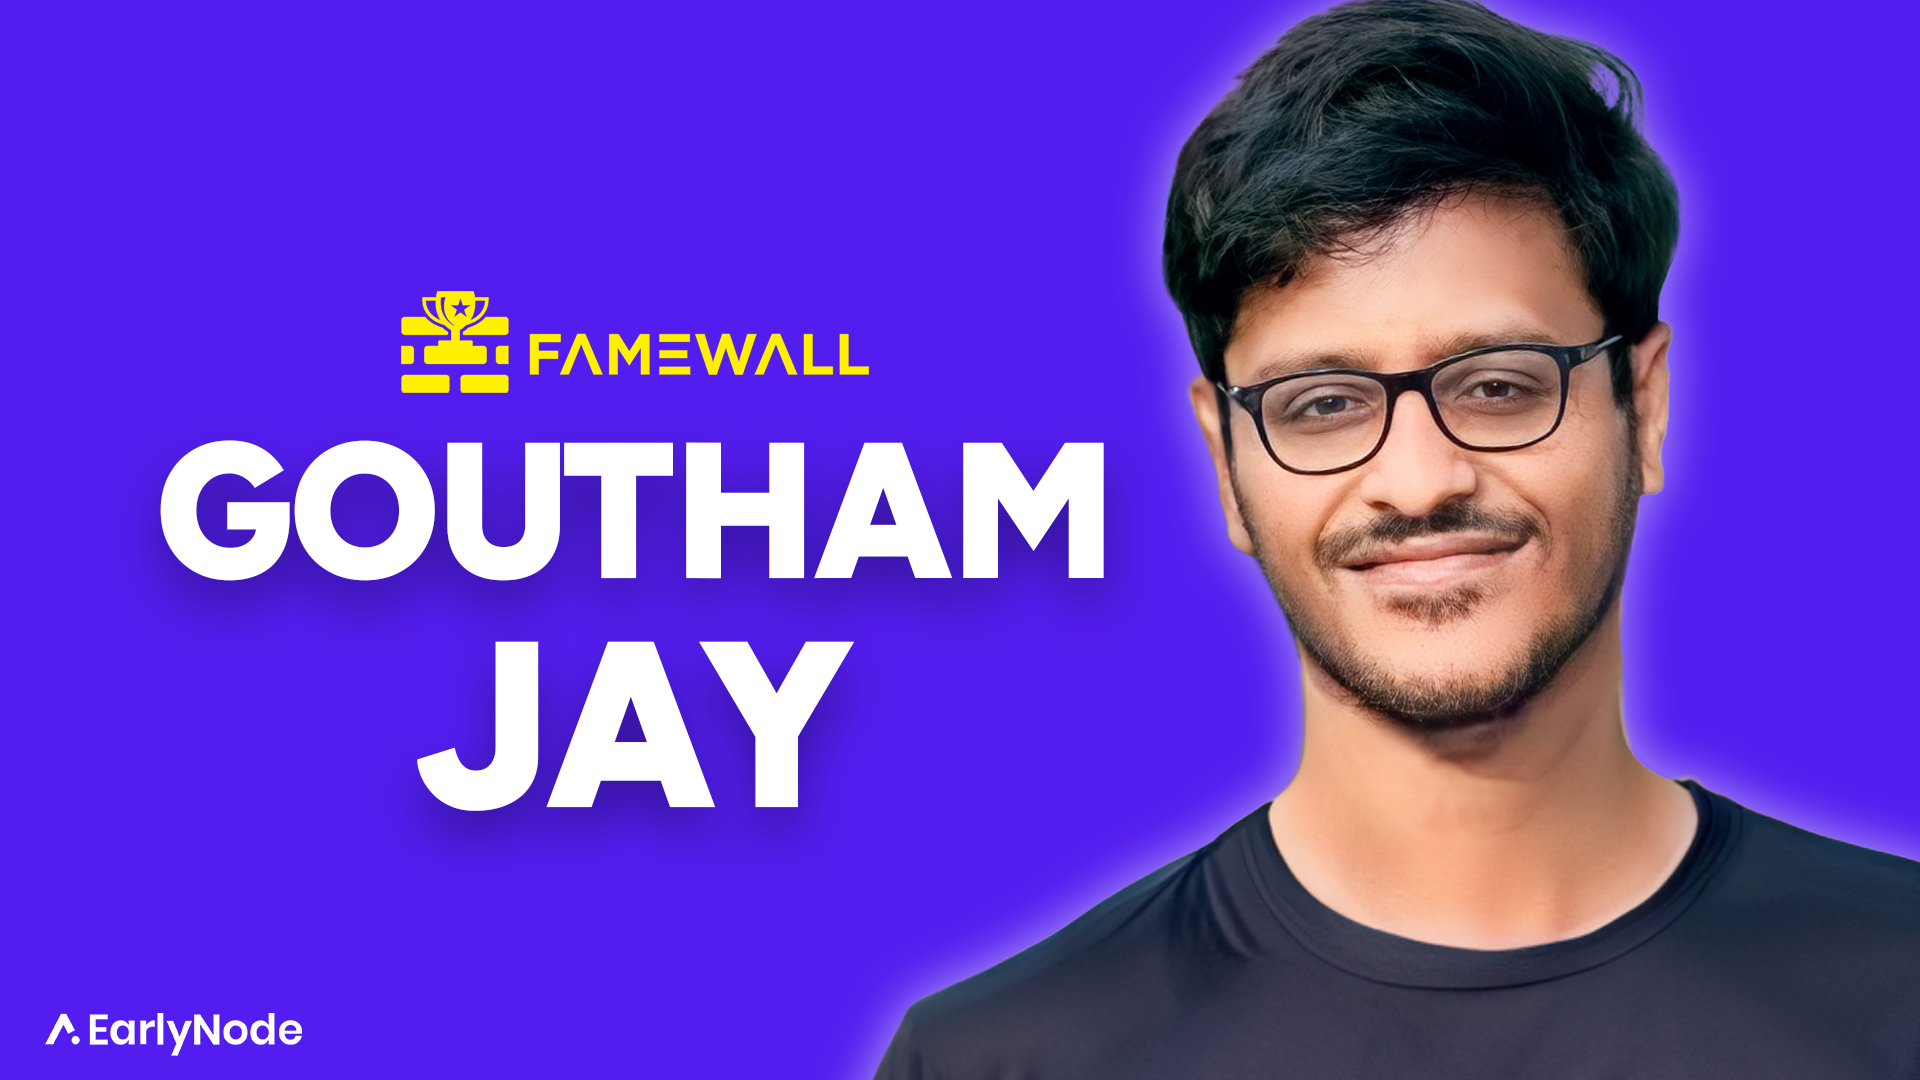 Twitter marketing and Building in Public | Interview with Goutham Jay, Founder of FameWall.io